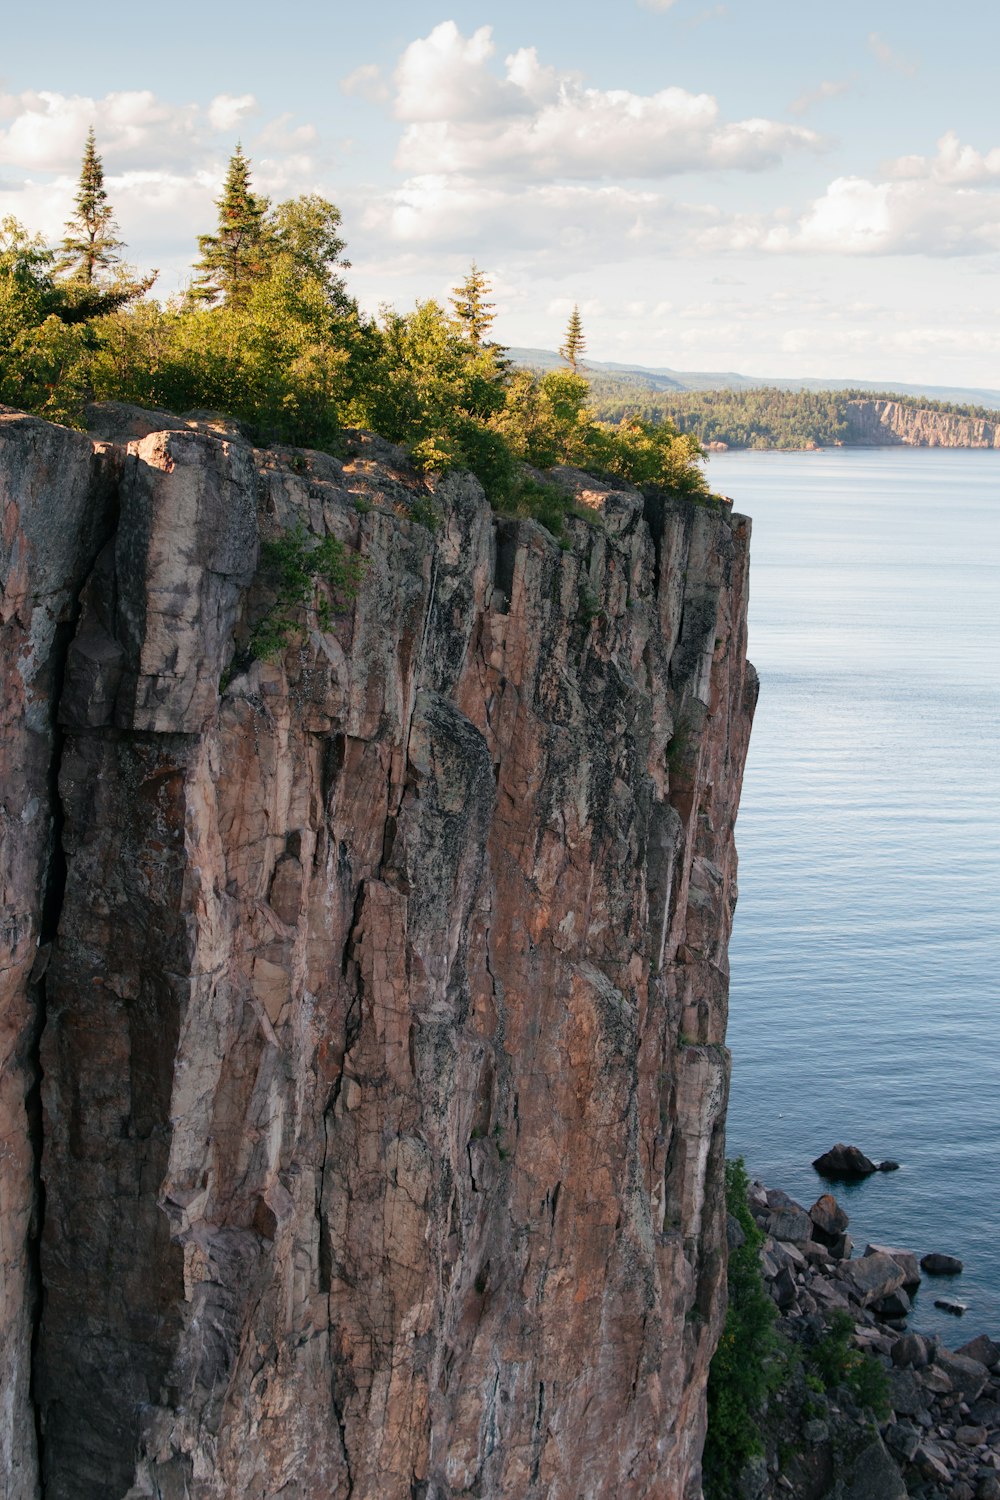 person sitting on rock formation near body of water during daytime